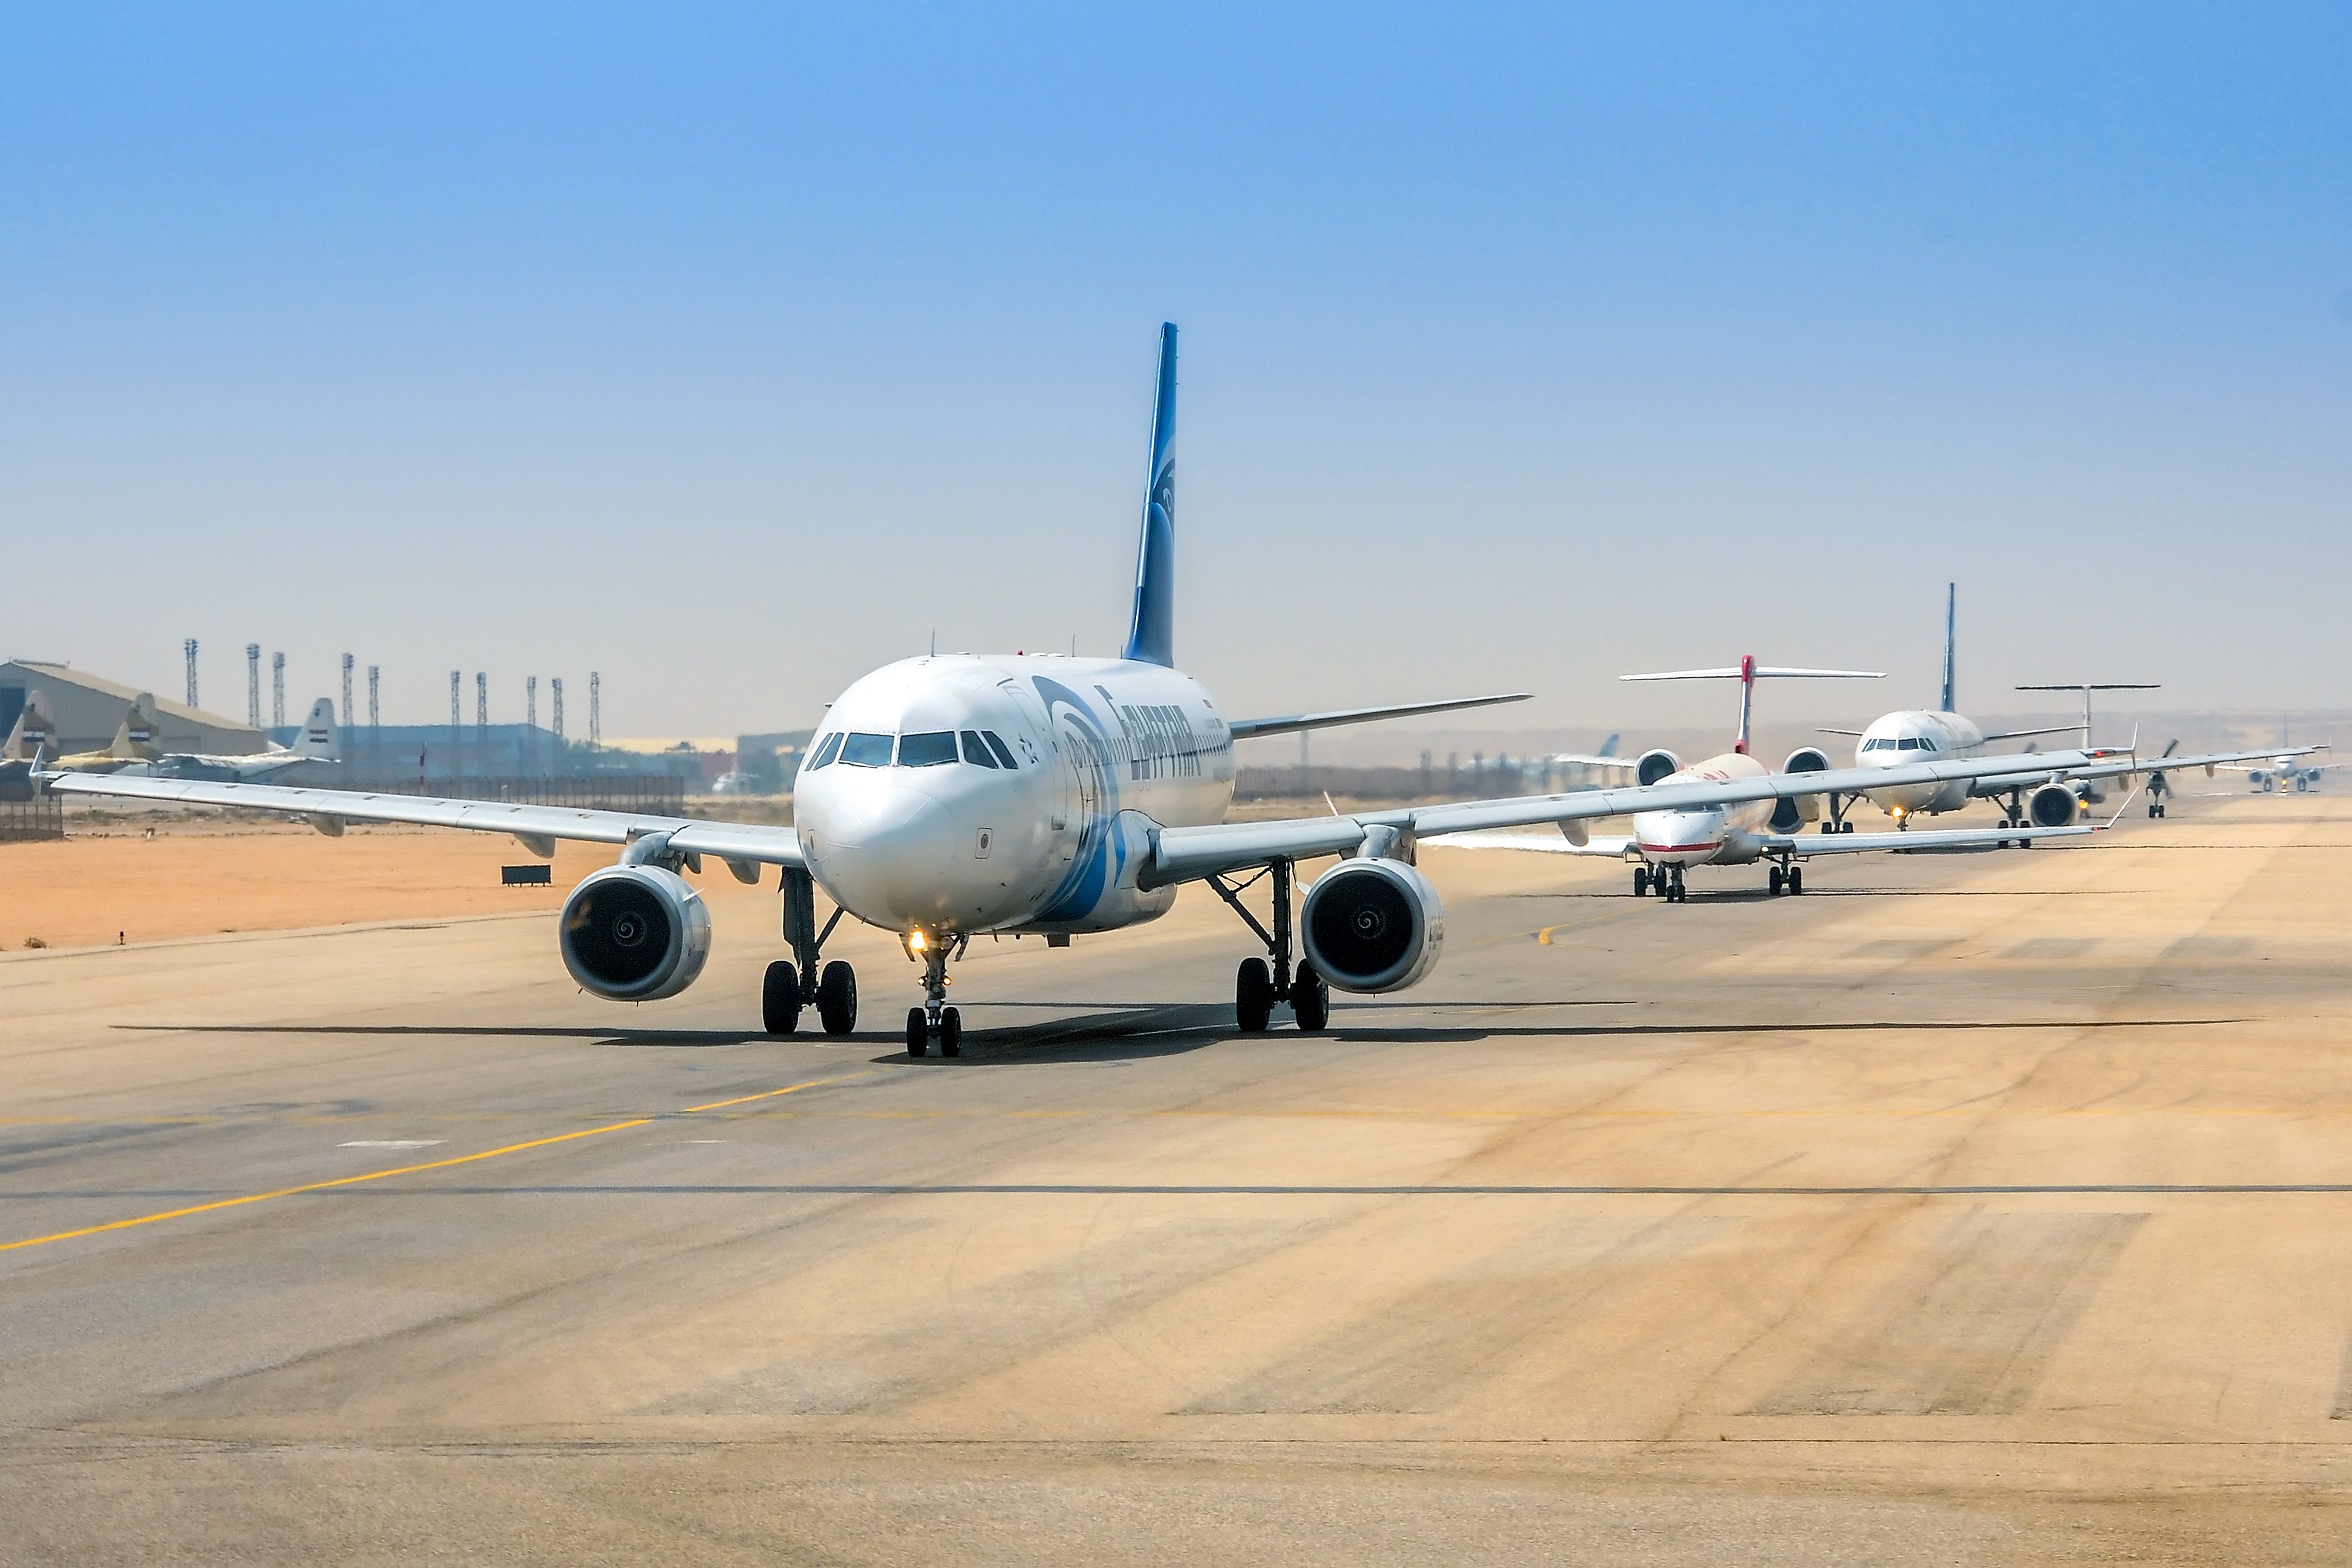 Egyptair aircraft lined up at Cairo International Airport